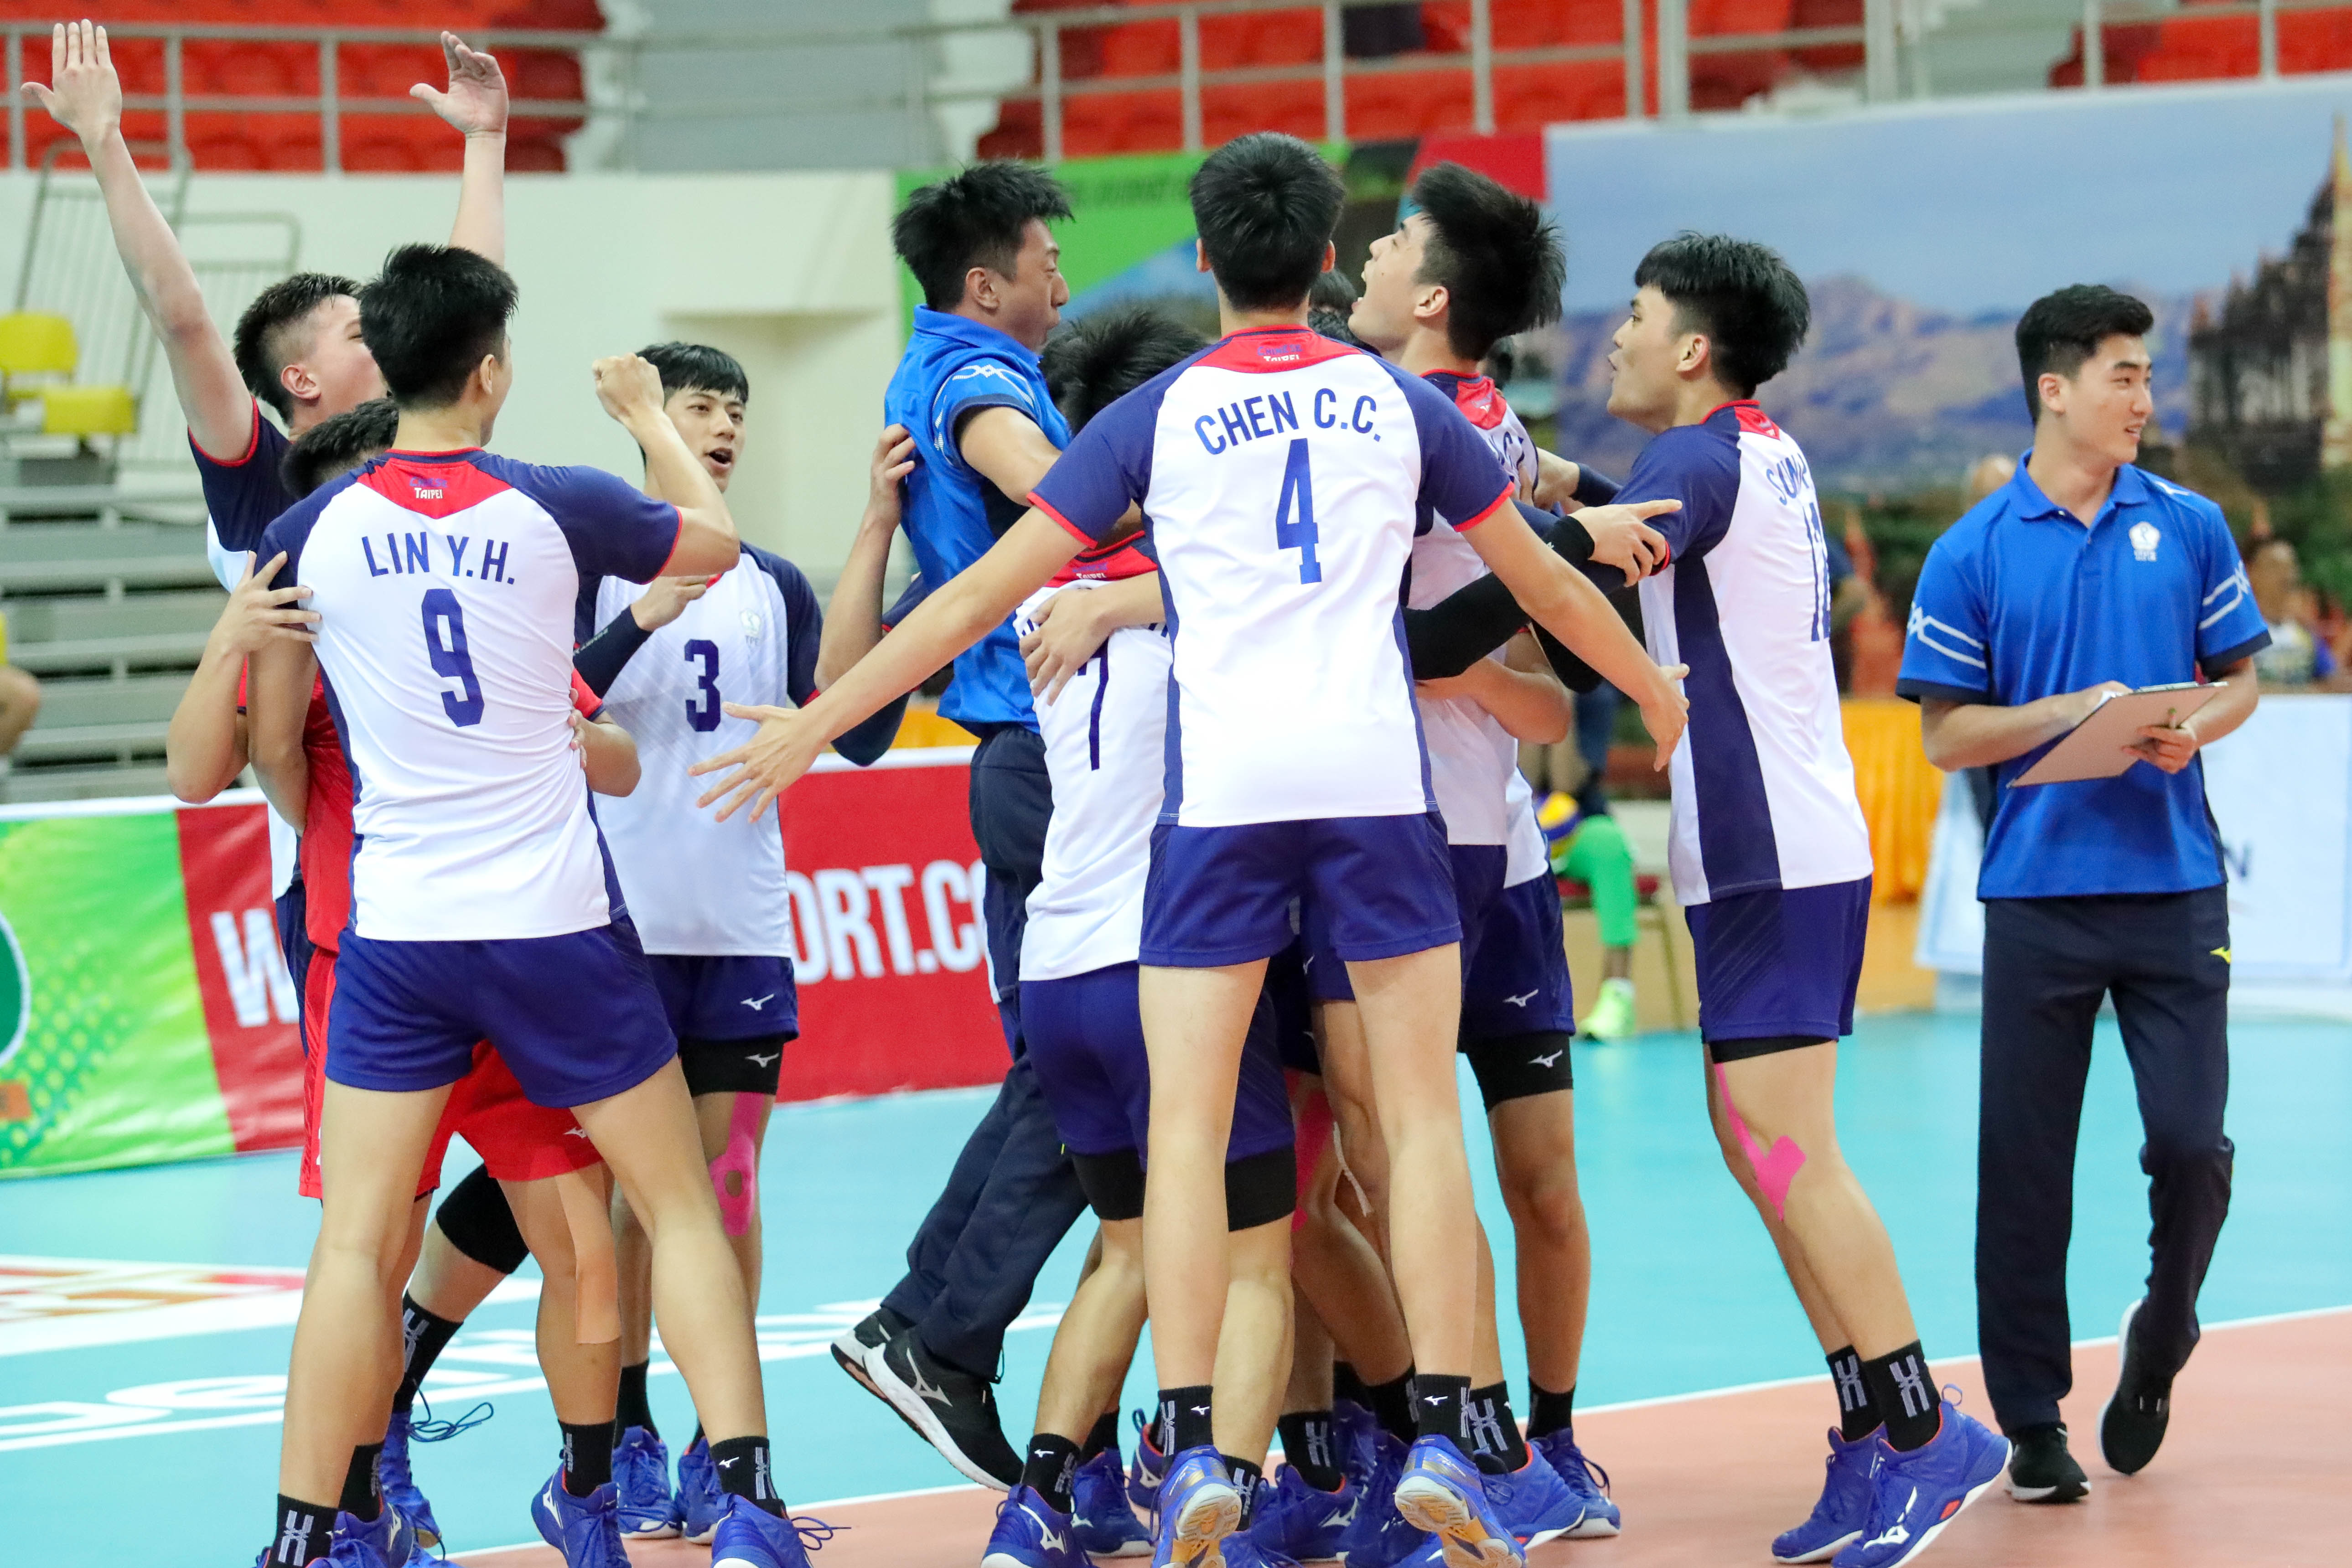 CHINESE TAIPEI ONE STEP CLOSER TO WINNING HISTORIC GOLD MEDAL AFTER TIE-BREAKER WIN AGAINST UNBEATEN JAPAN